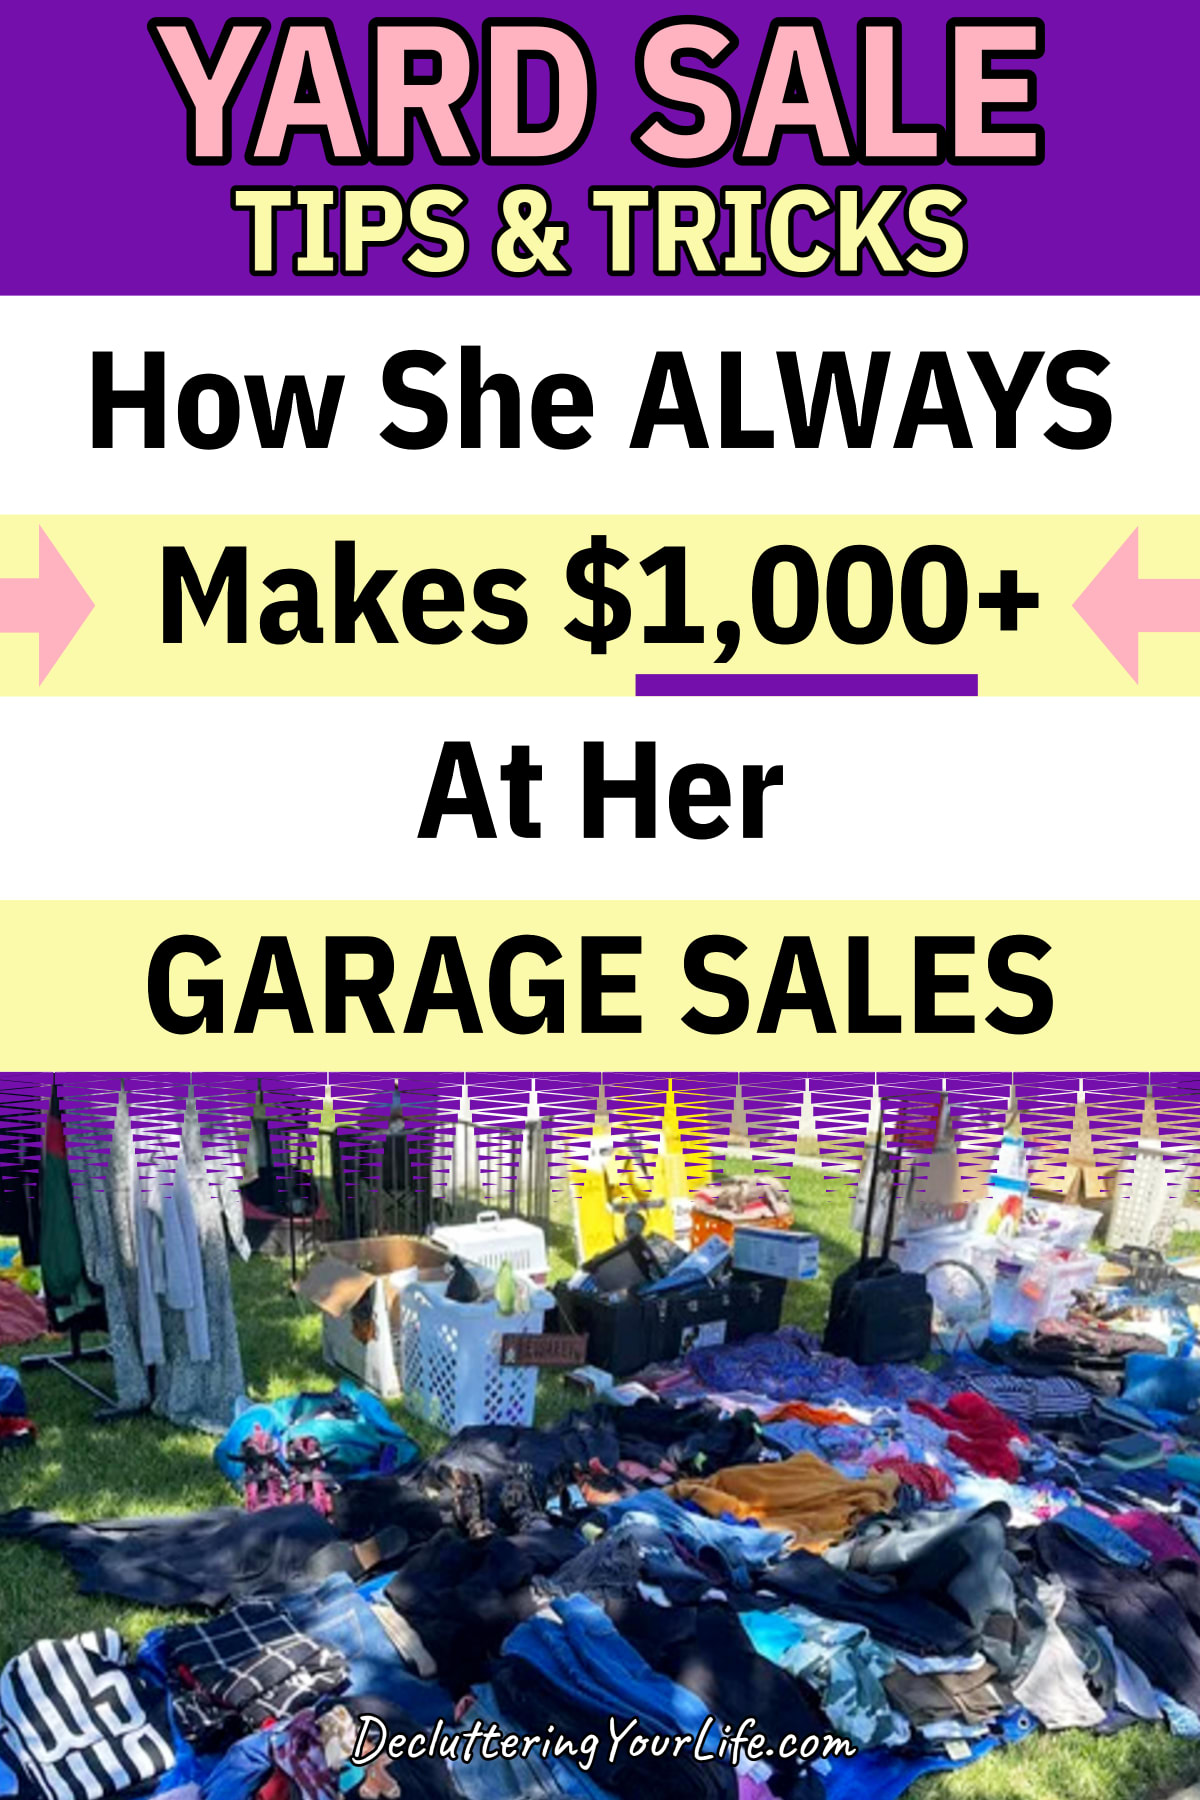 Yard Sale Ideas - These garage sale tips make her over $1,000 EVERY time she has a garage sale.